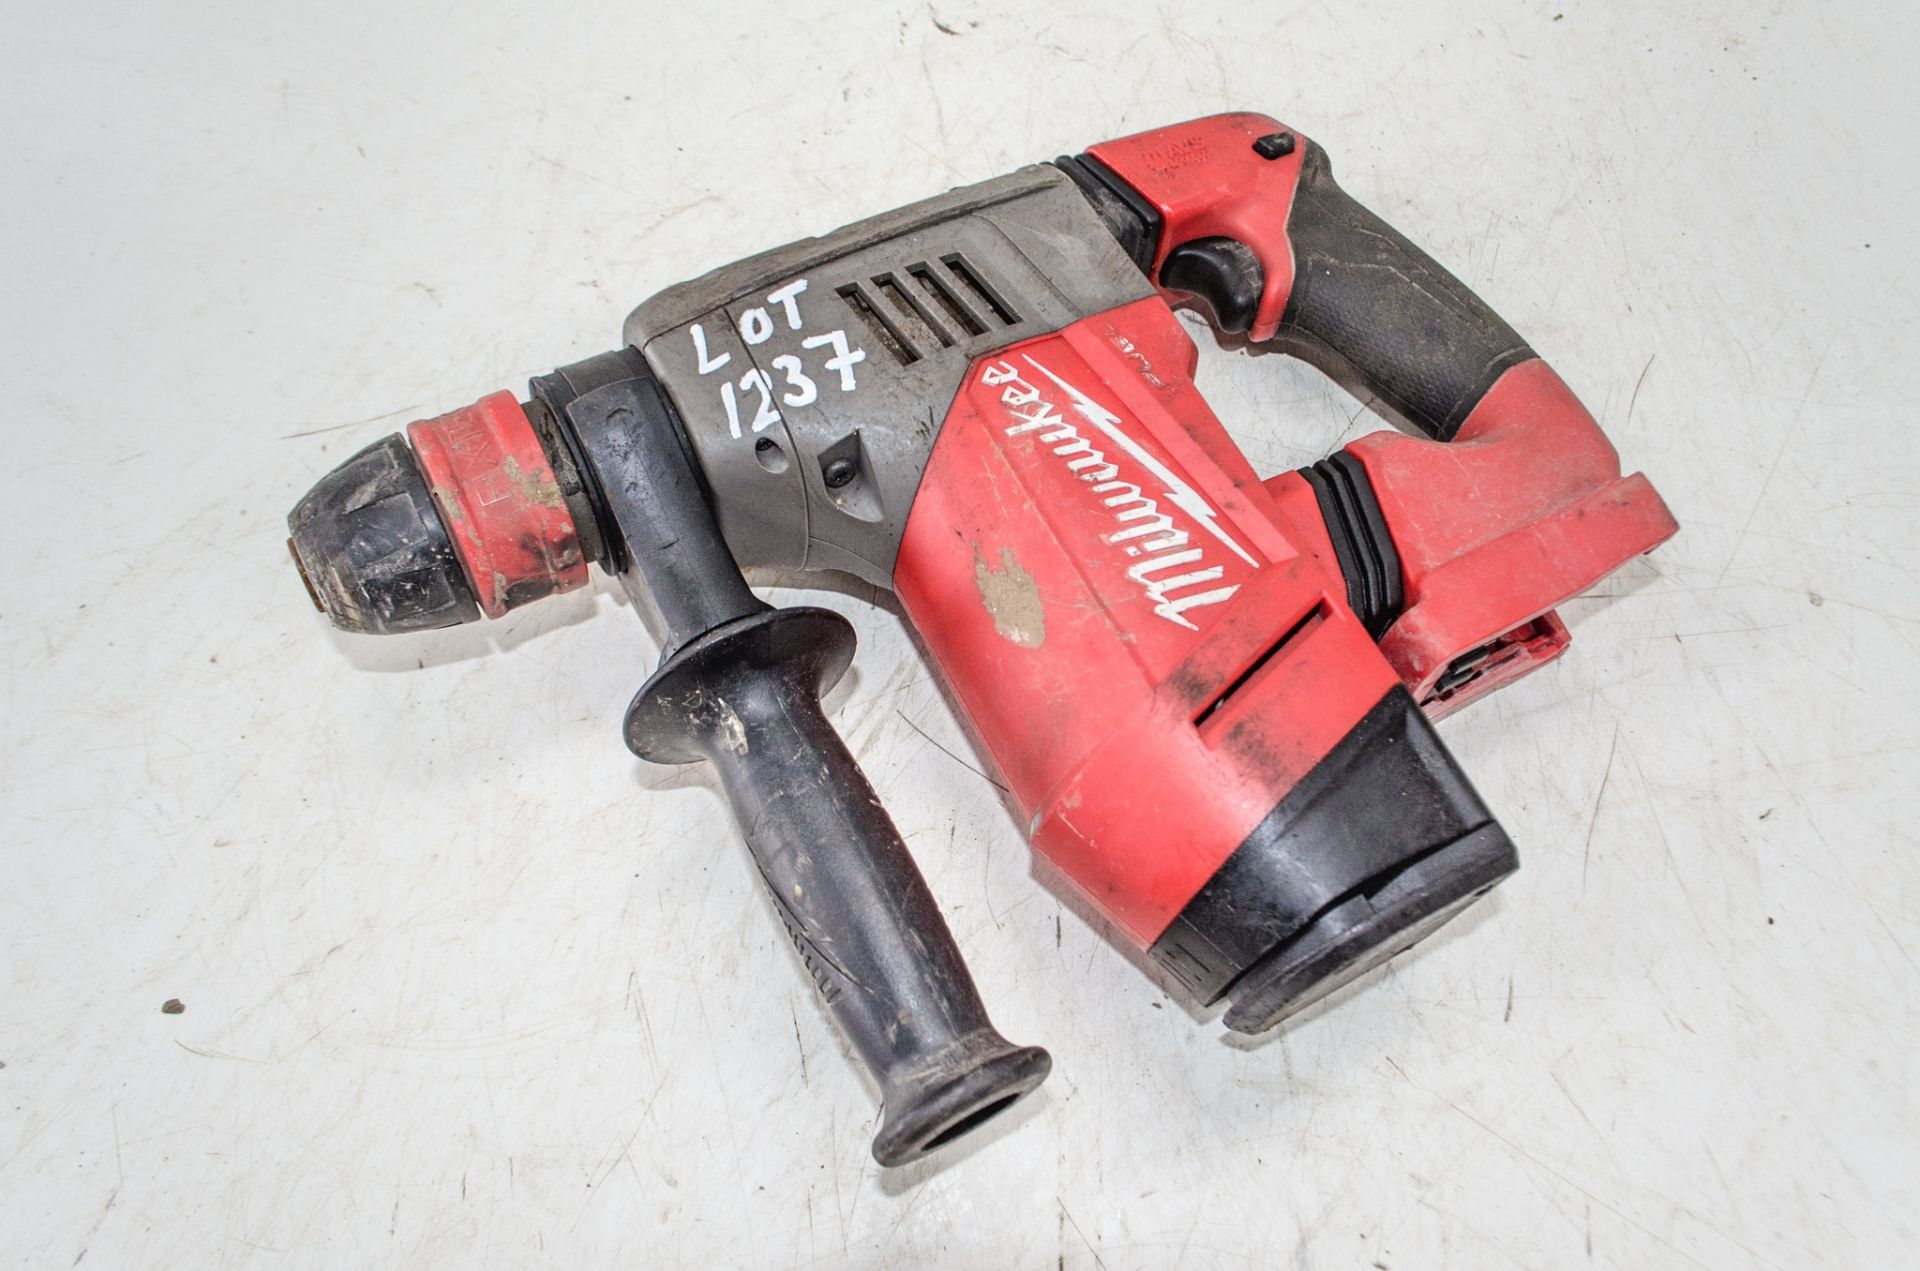 Milwaukee 18v cordless SDS rotary hammer drill ** No battery or charger **